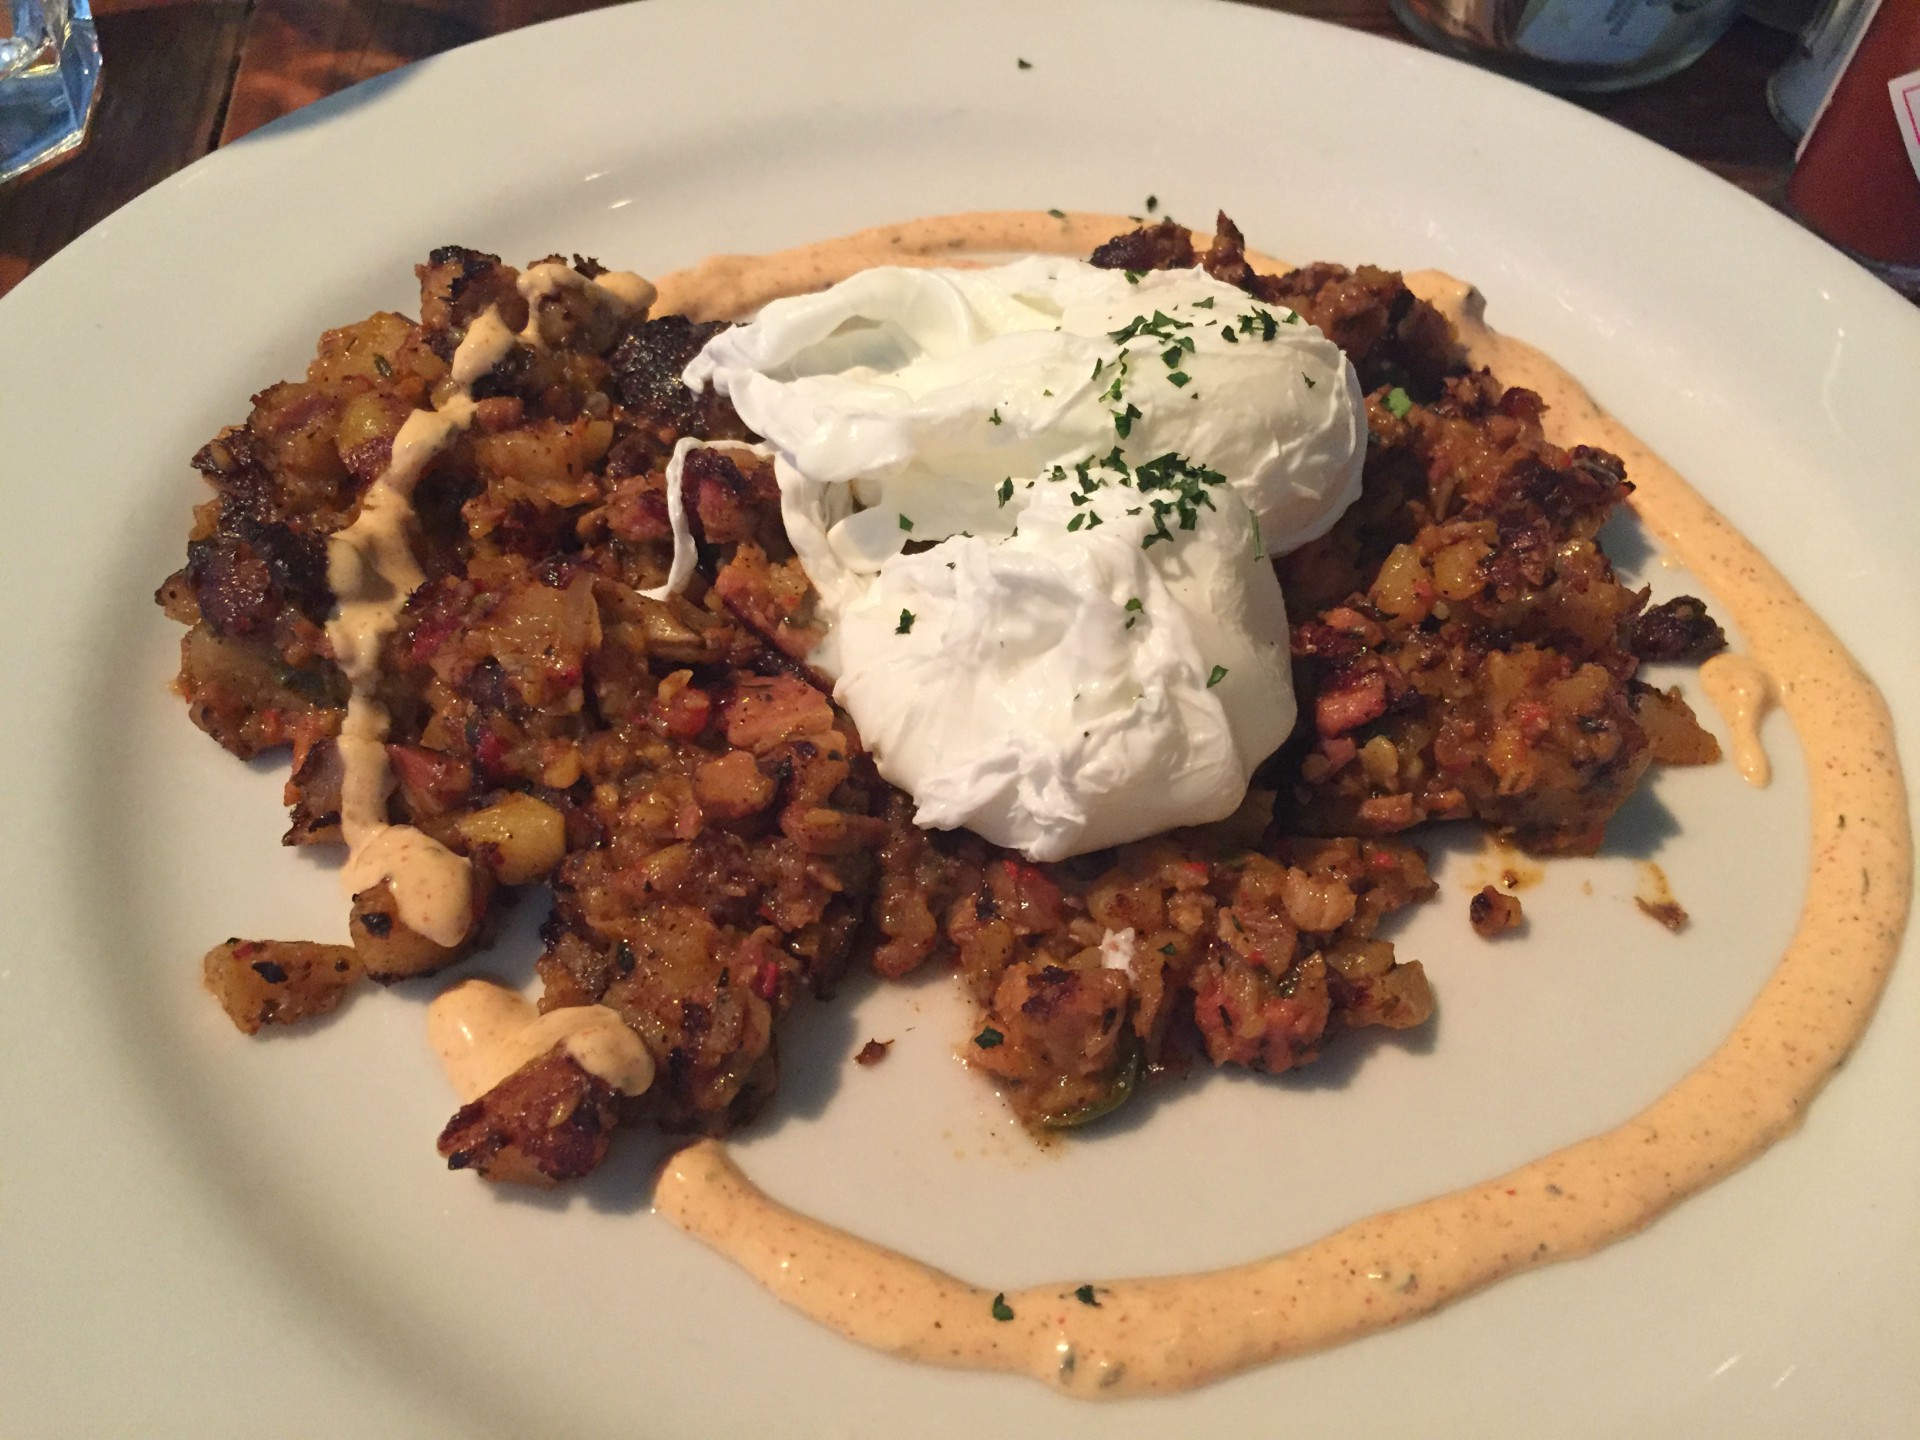 A pork hash exemplified the restaurant's zero waste policies, featuring pork leftover from making other dishes.